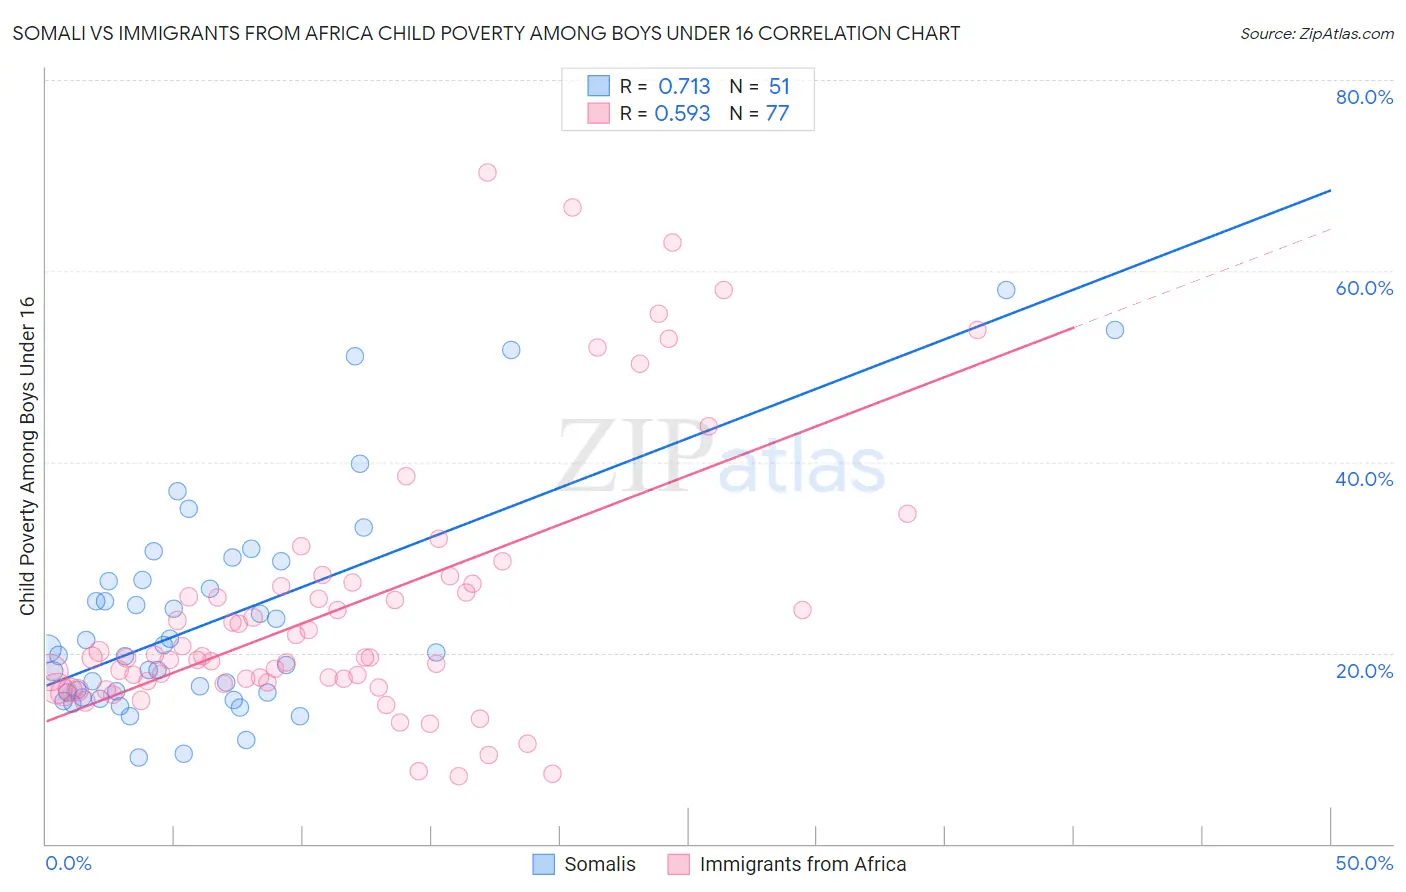 Somali vs Immigrants from Africa Child Poverty Among Boys Under 16